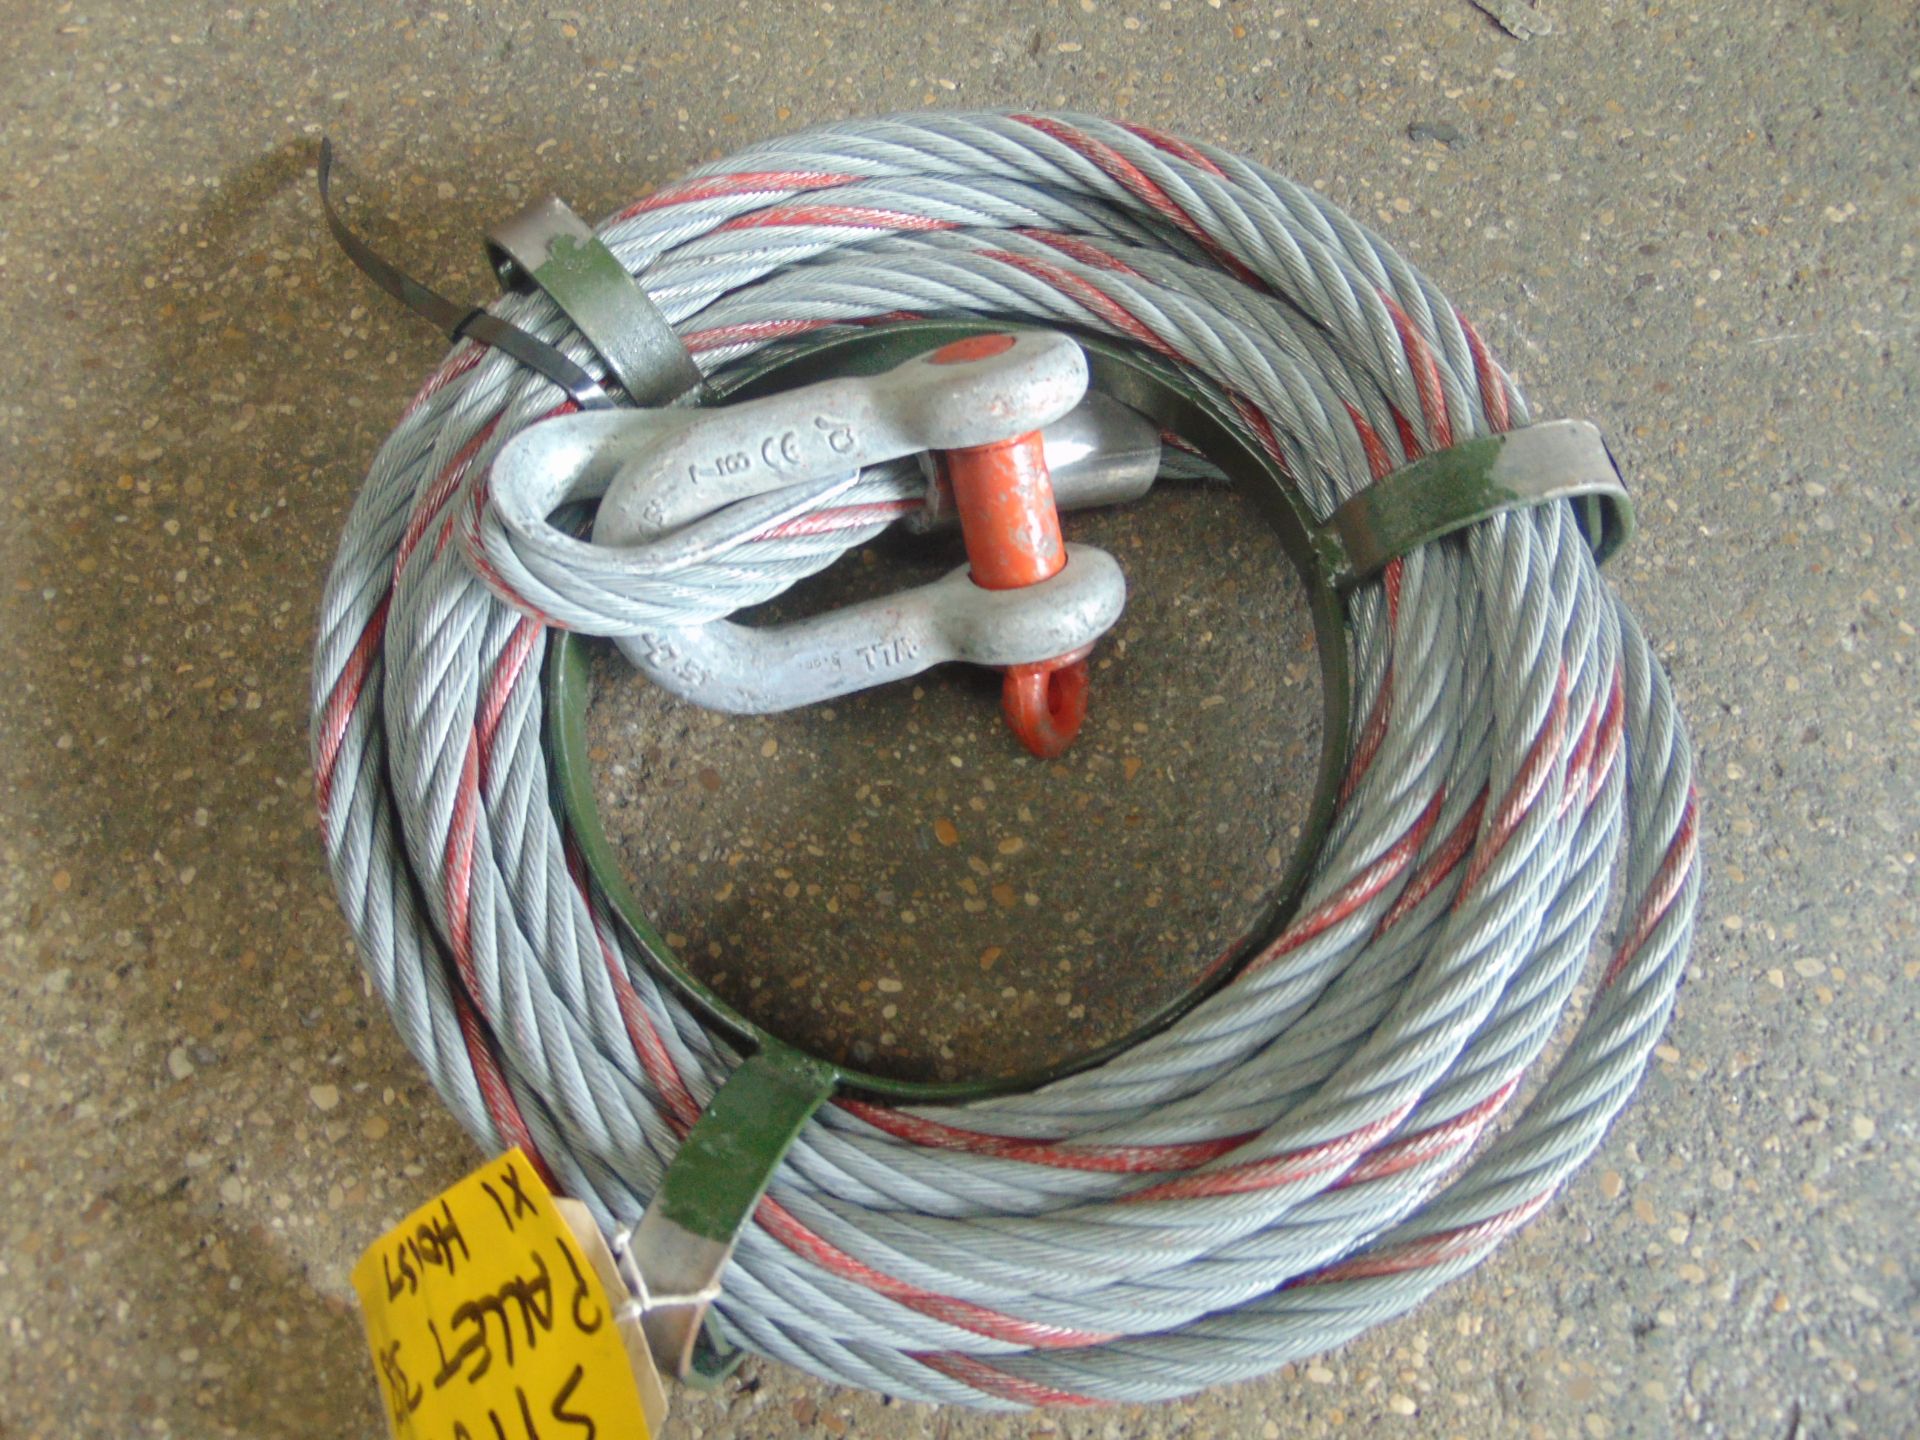 10m of 3T Wire Winch/Hoist Rope - Image 2 of 5